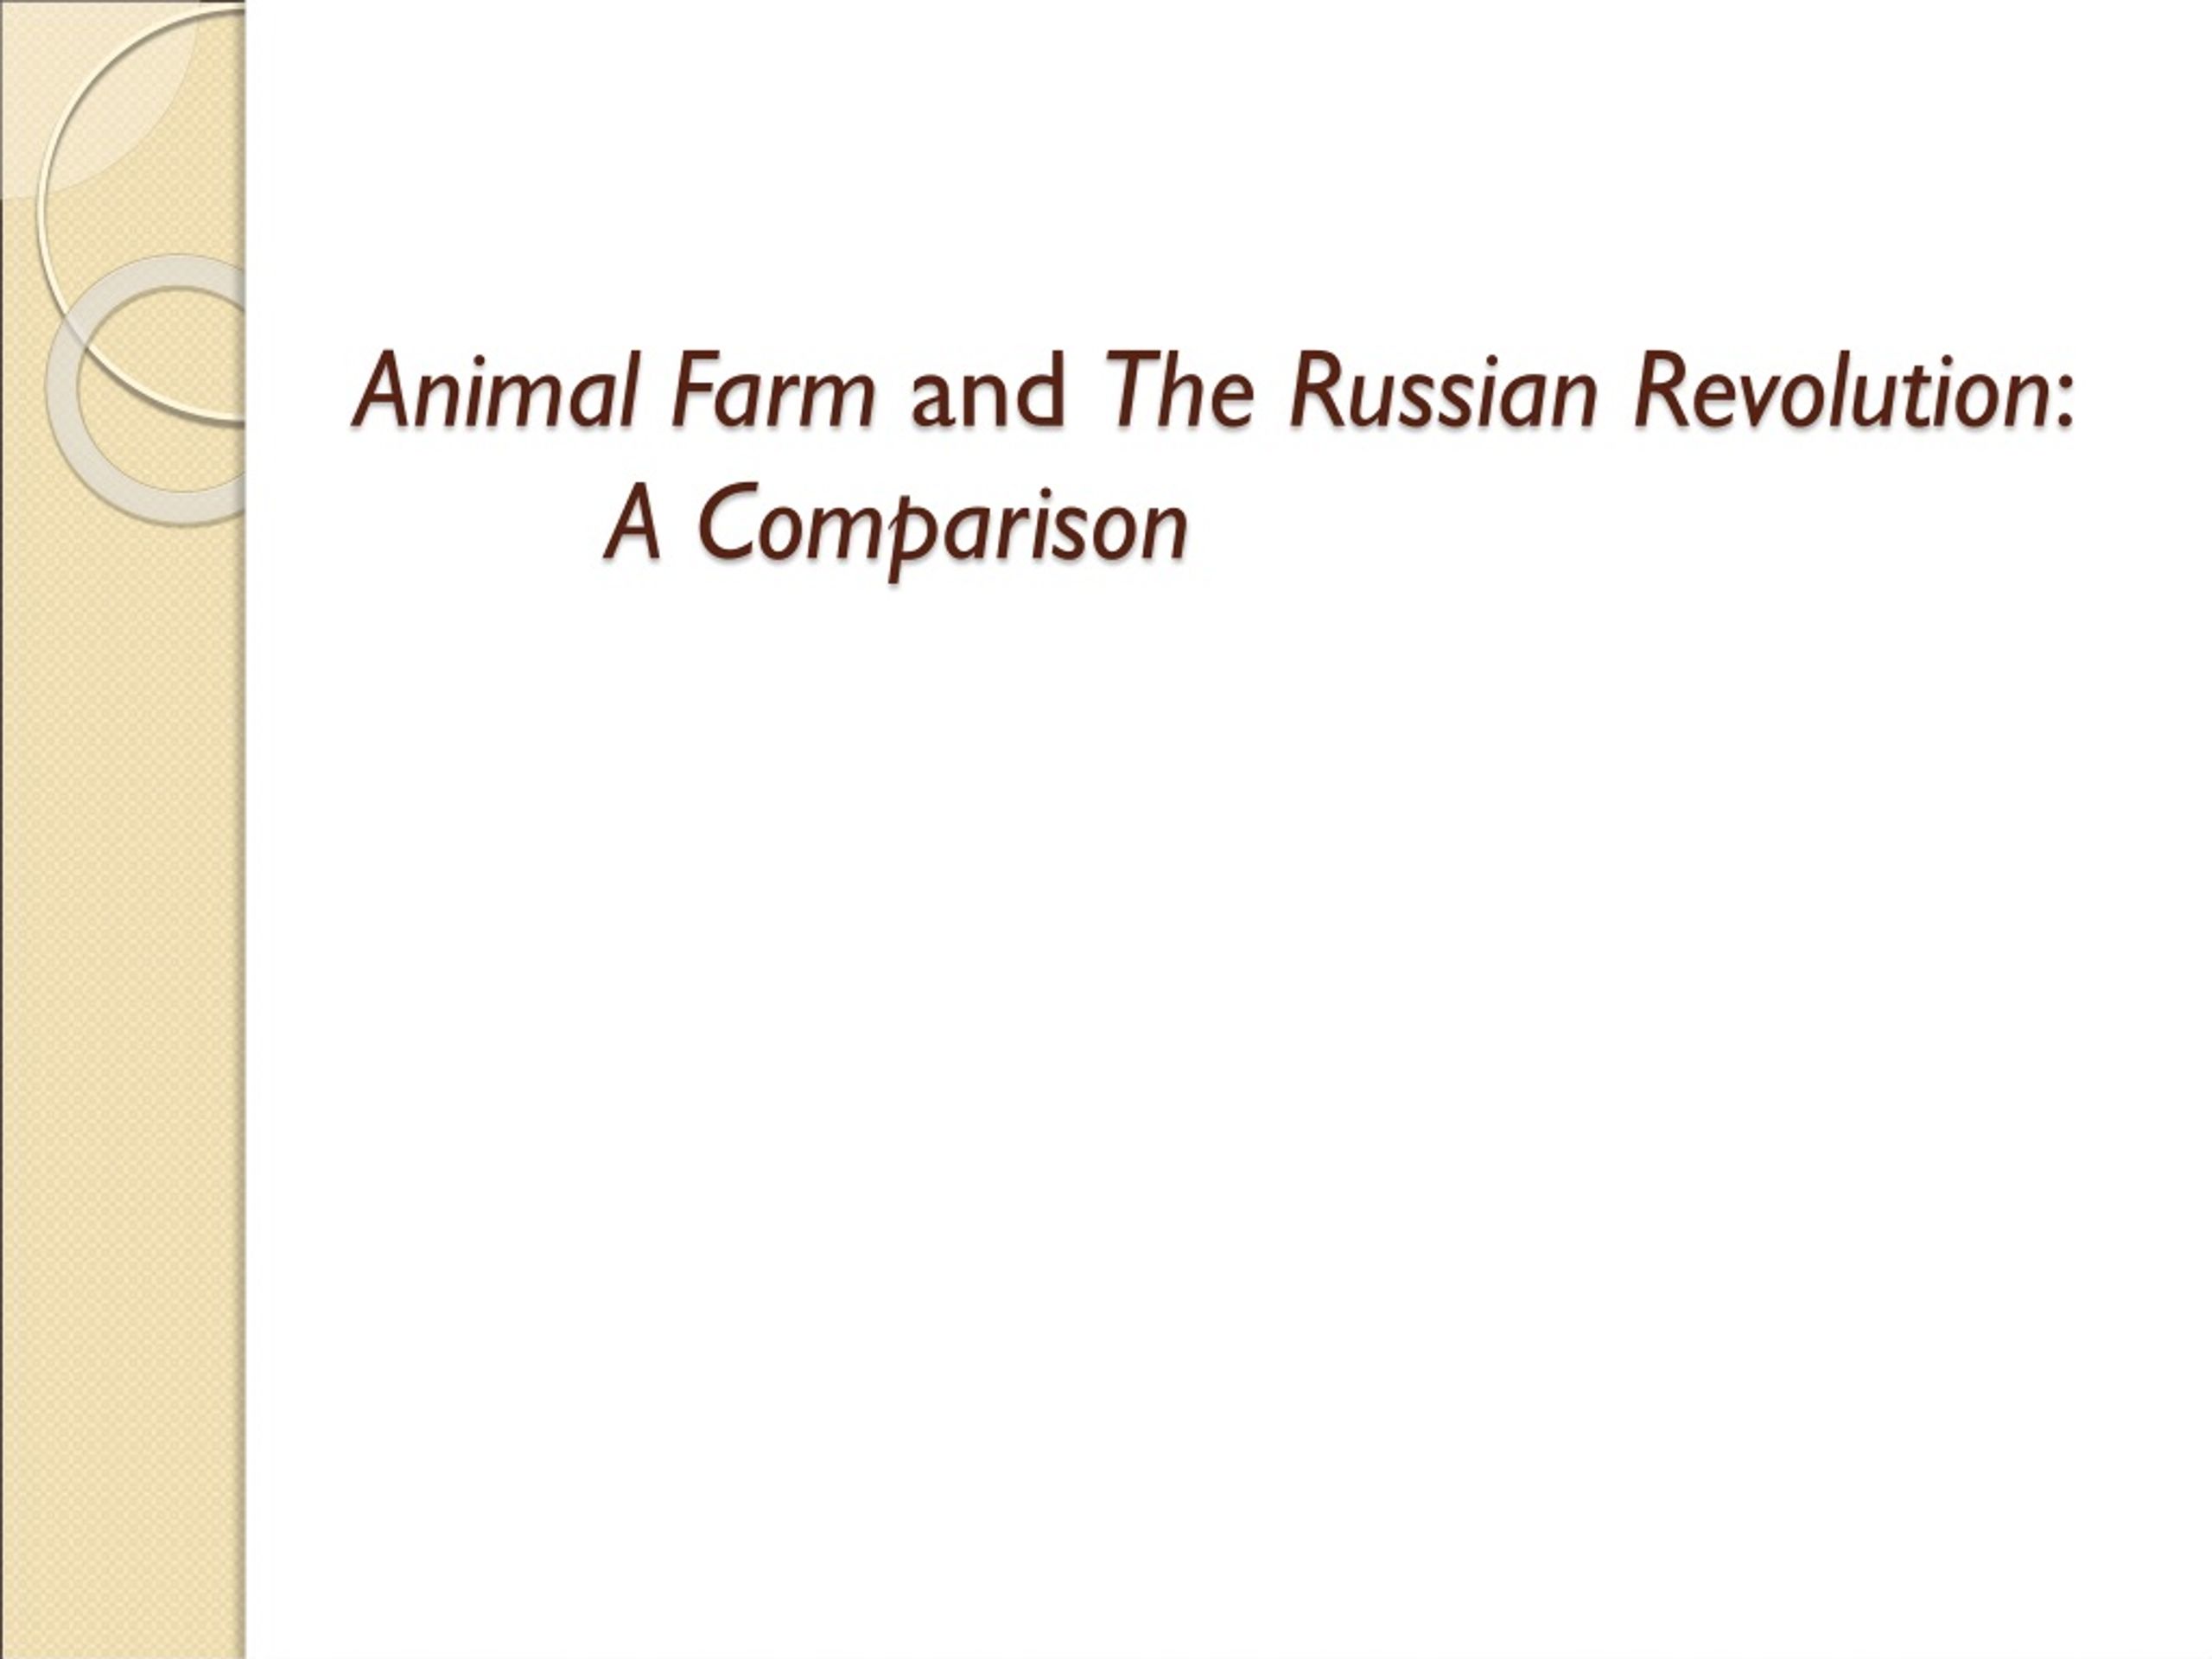 Animal Farm: A Tale of Management Principles and Power Dynamics